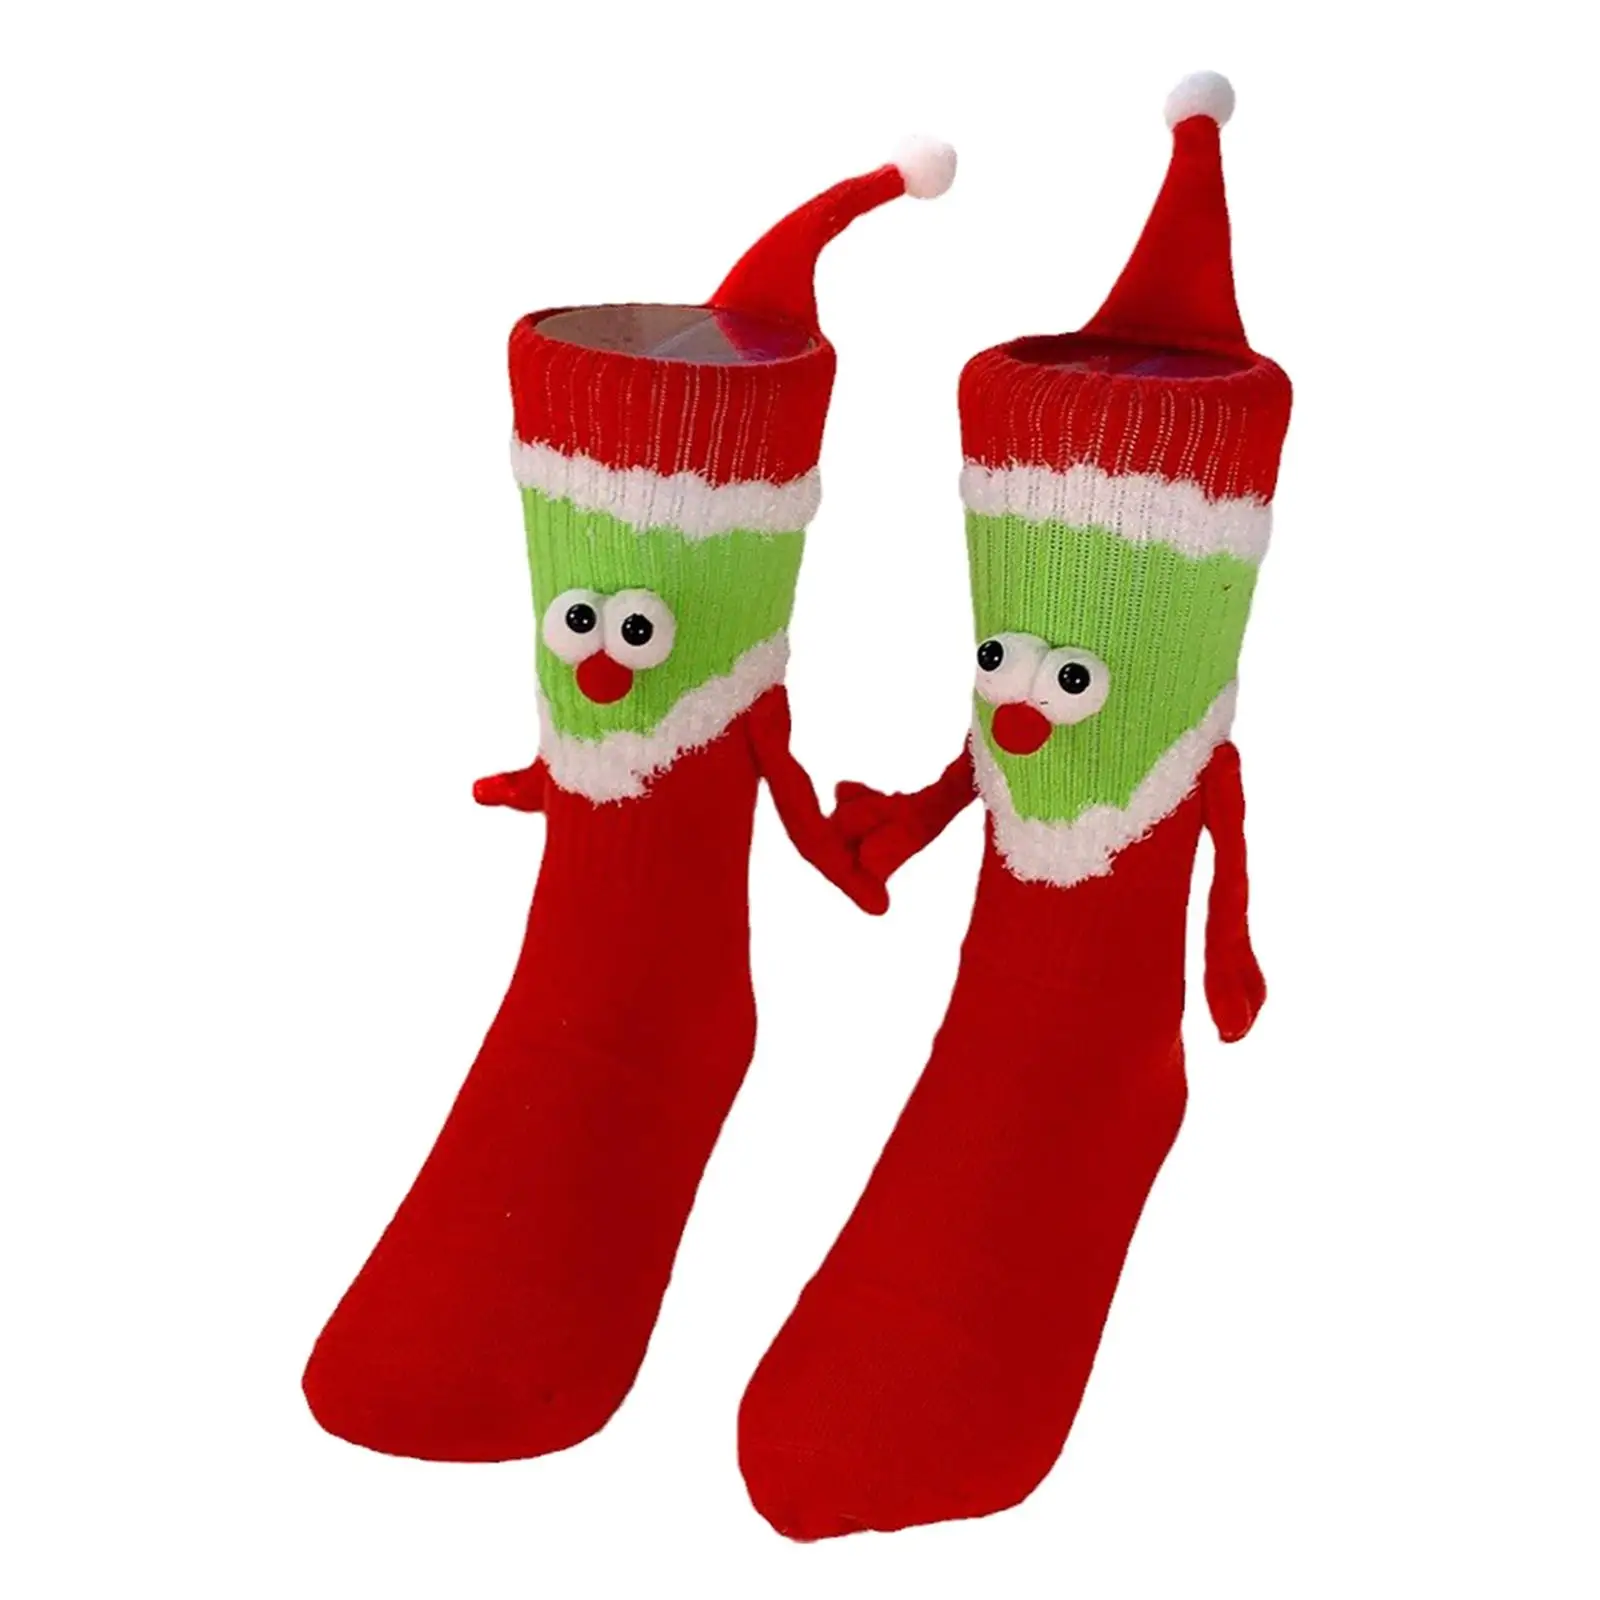 Christmas Hand in Hand Couple Socks Soft for Daily Travel Outdoor and Indoor